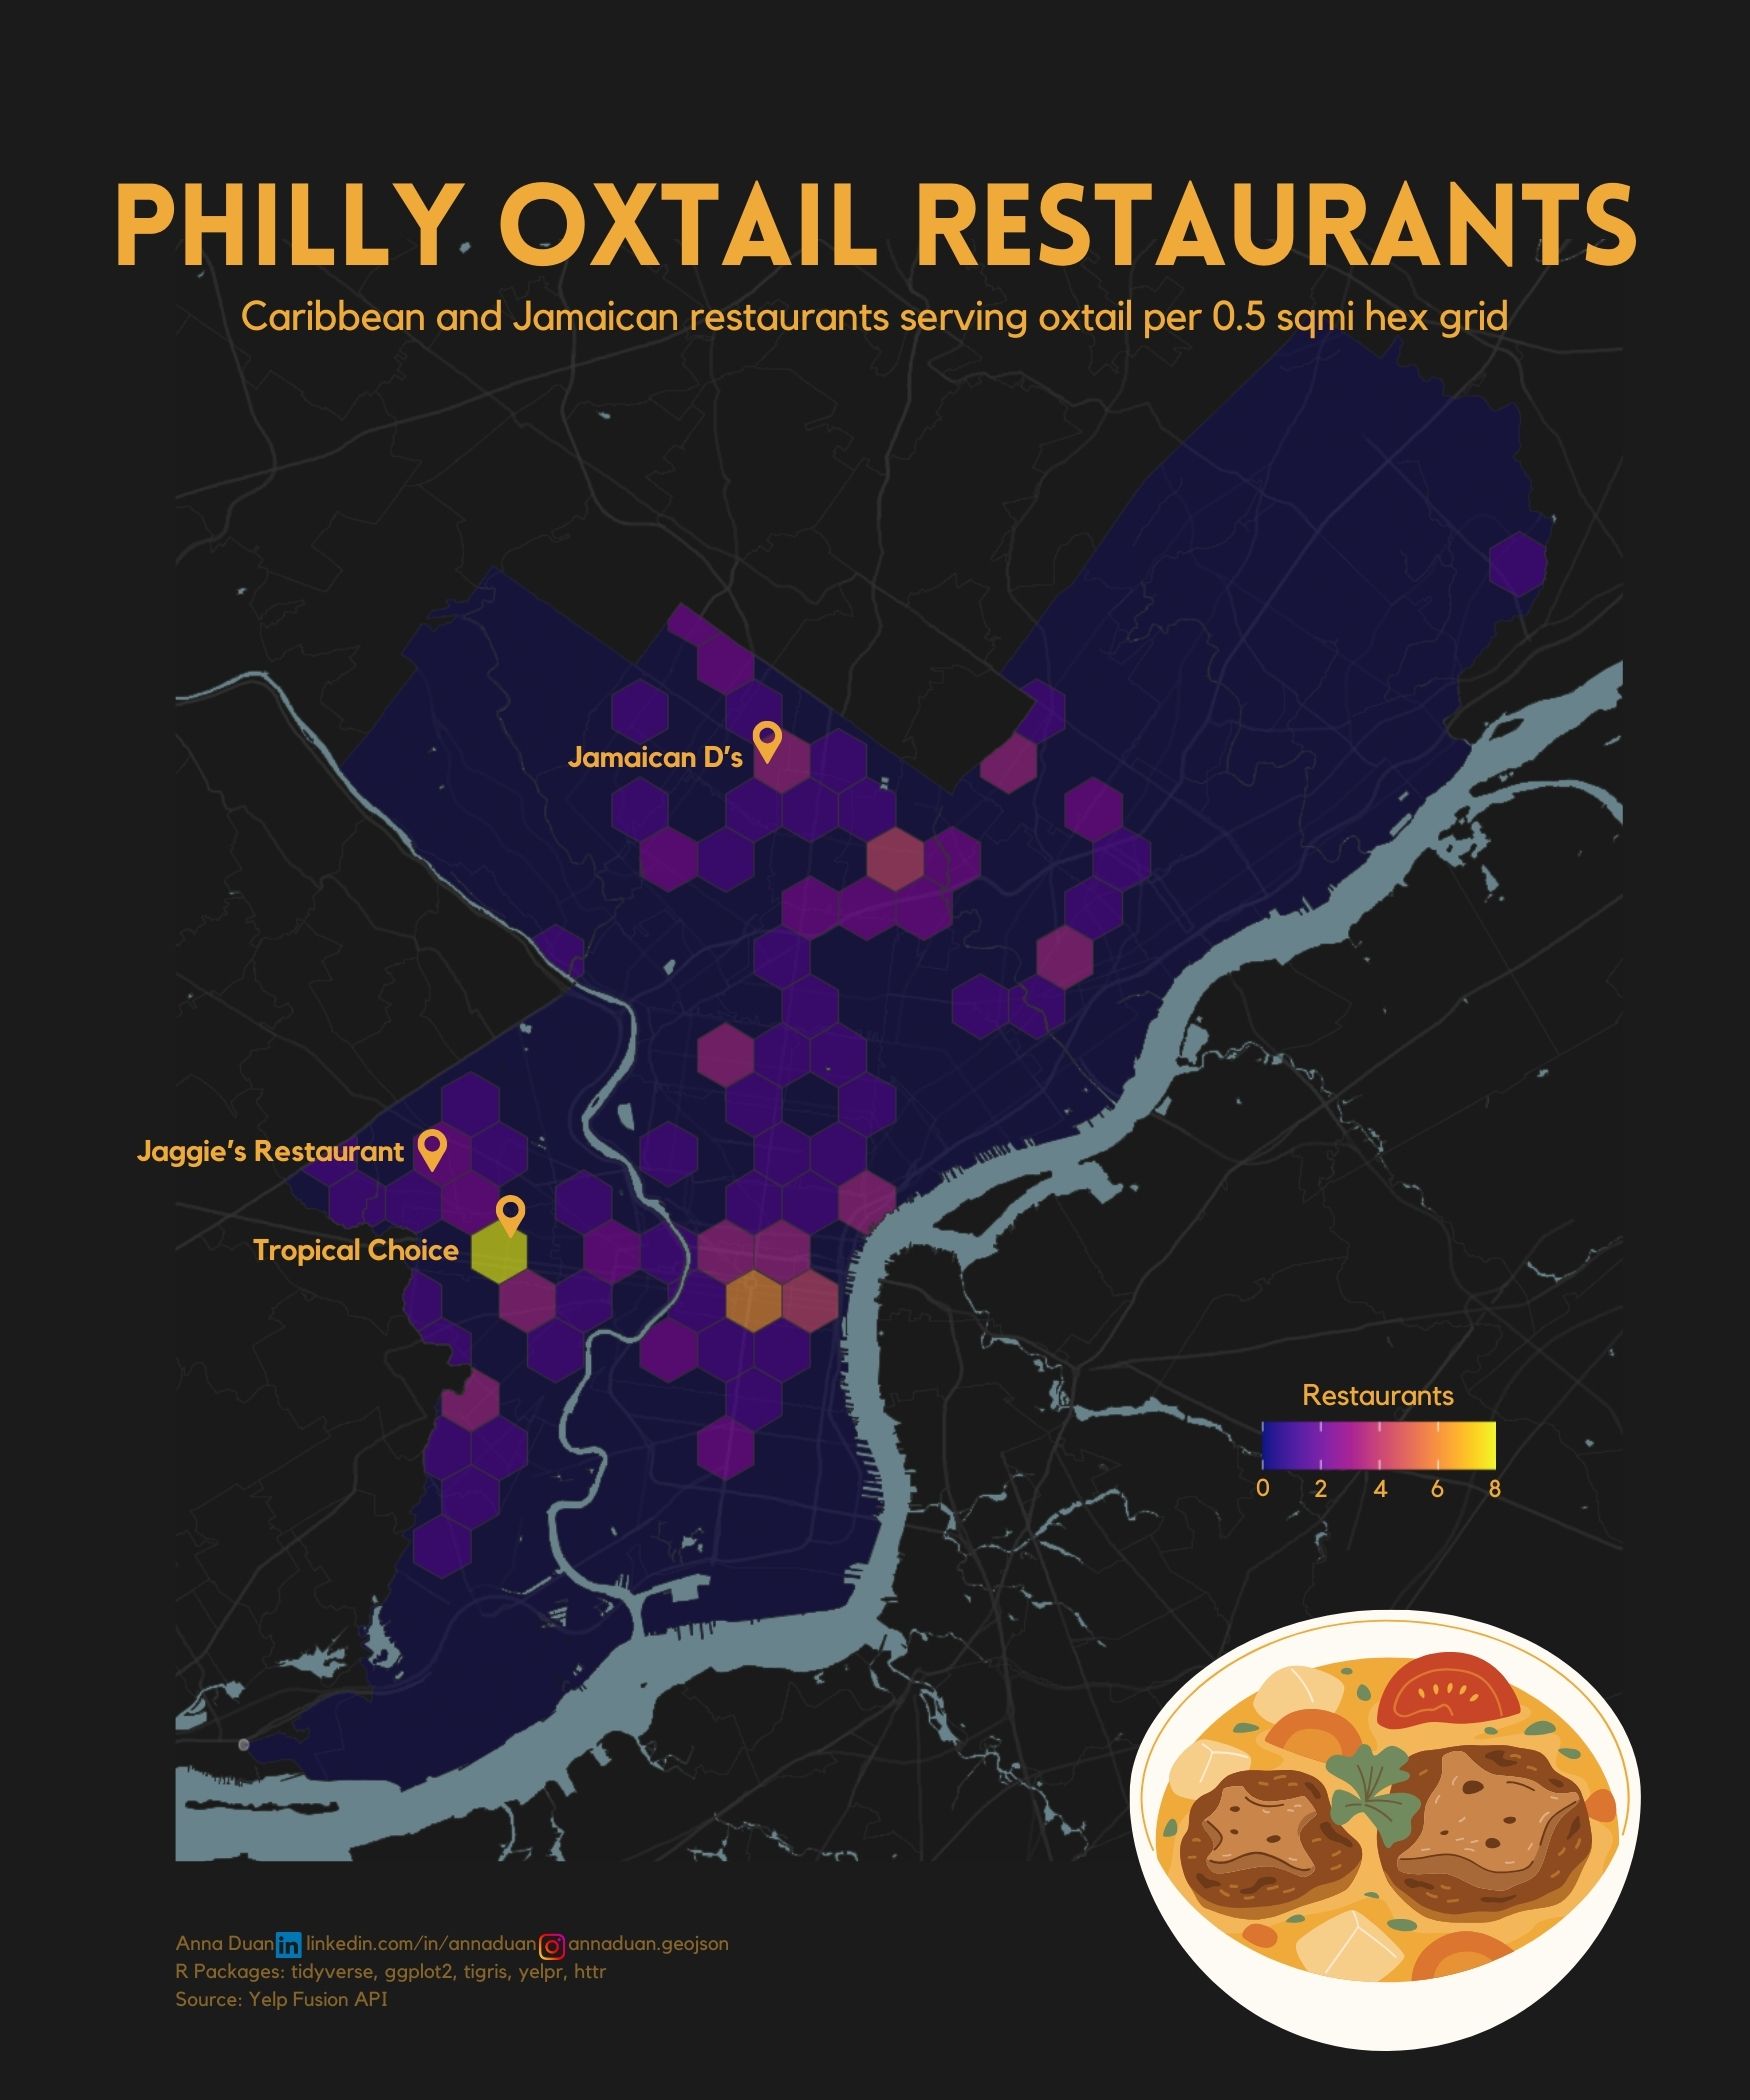 Philly oxtail restaurants by Anna Duan